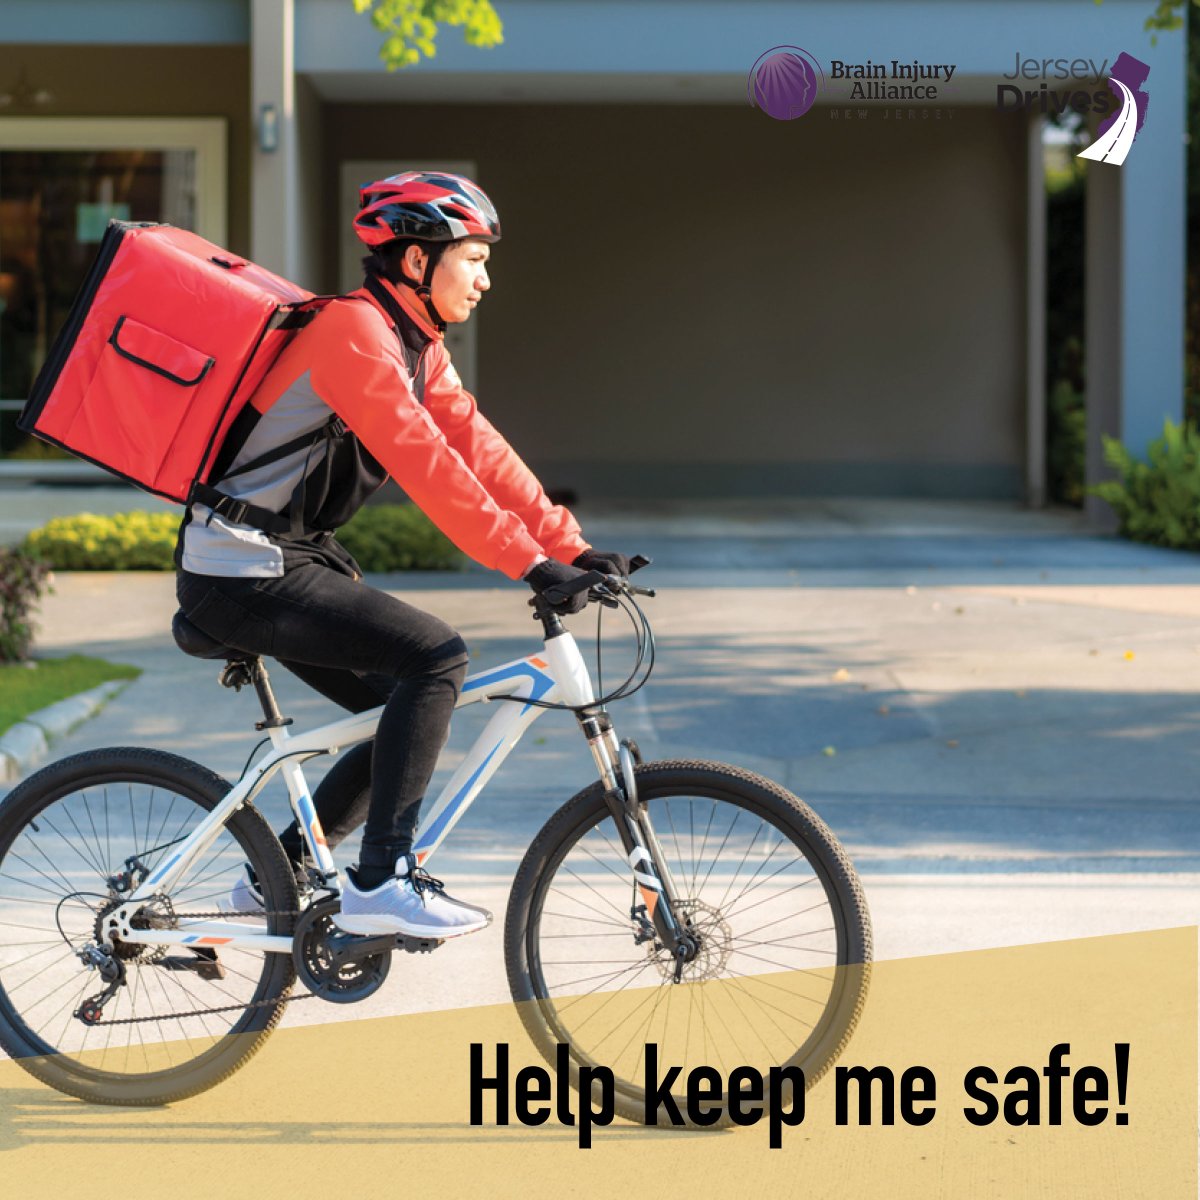 Keep your eyes on the roads and help ensure a safe journey for valued delivery workers.
#BikeSafetyAwareness
#JerseyDrives

Please email all comments to CHPDSocialMedia@cherryhillpolice.com

#CherryHillPD